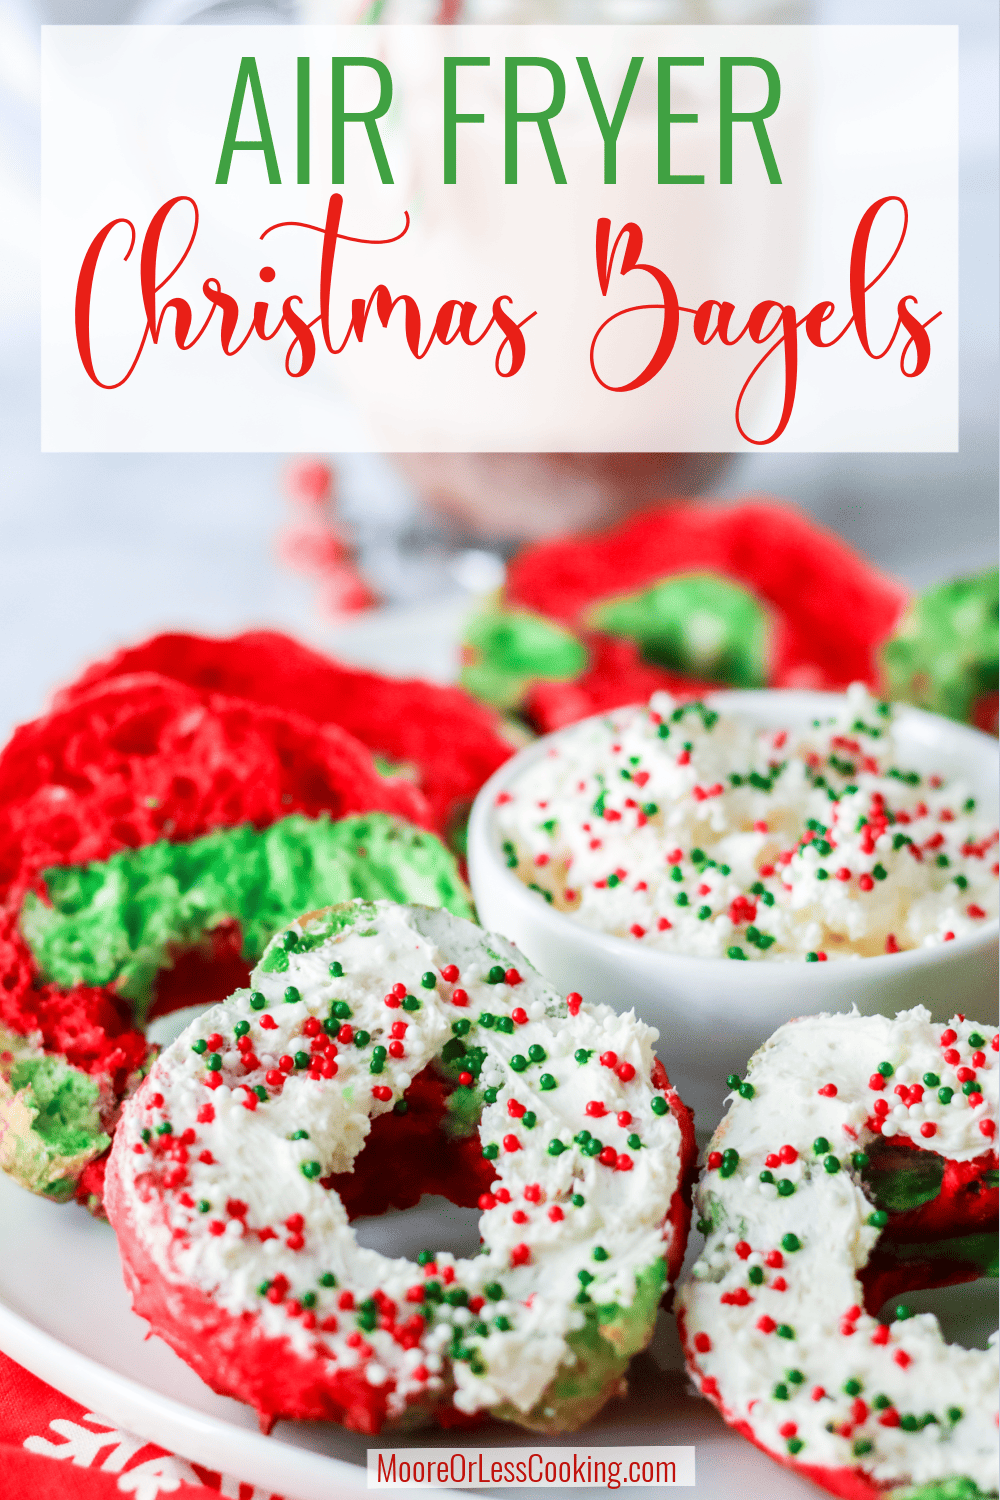 If you love bagels, you'll want to make these festive Air Fryer Christmas Bagels for the holidays. They're all decked out in red and green, ready for a sweet or savory topping. They're perfect for brunch or as an appetizer for parties. Oh, and they're so easy to make! via @Mooreorlesscook